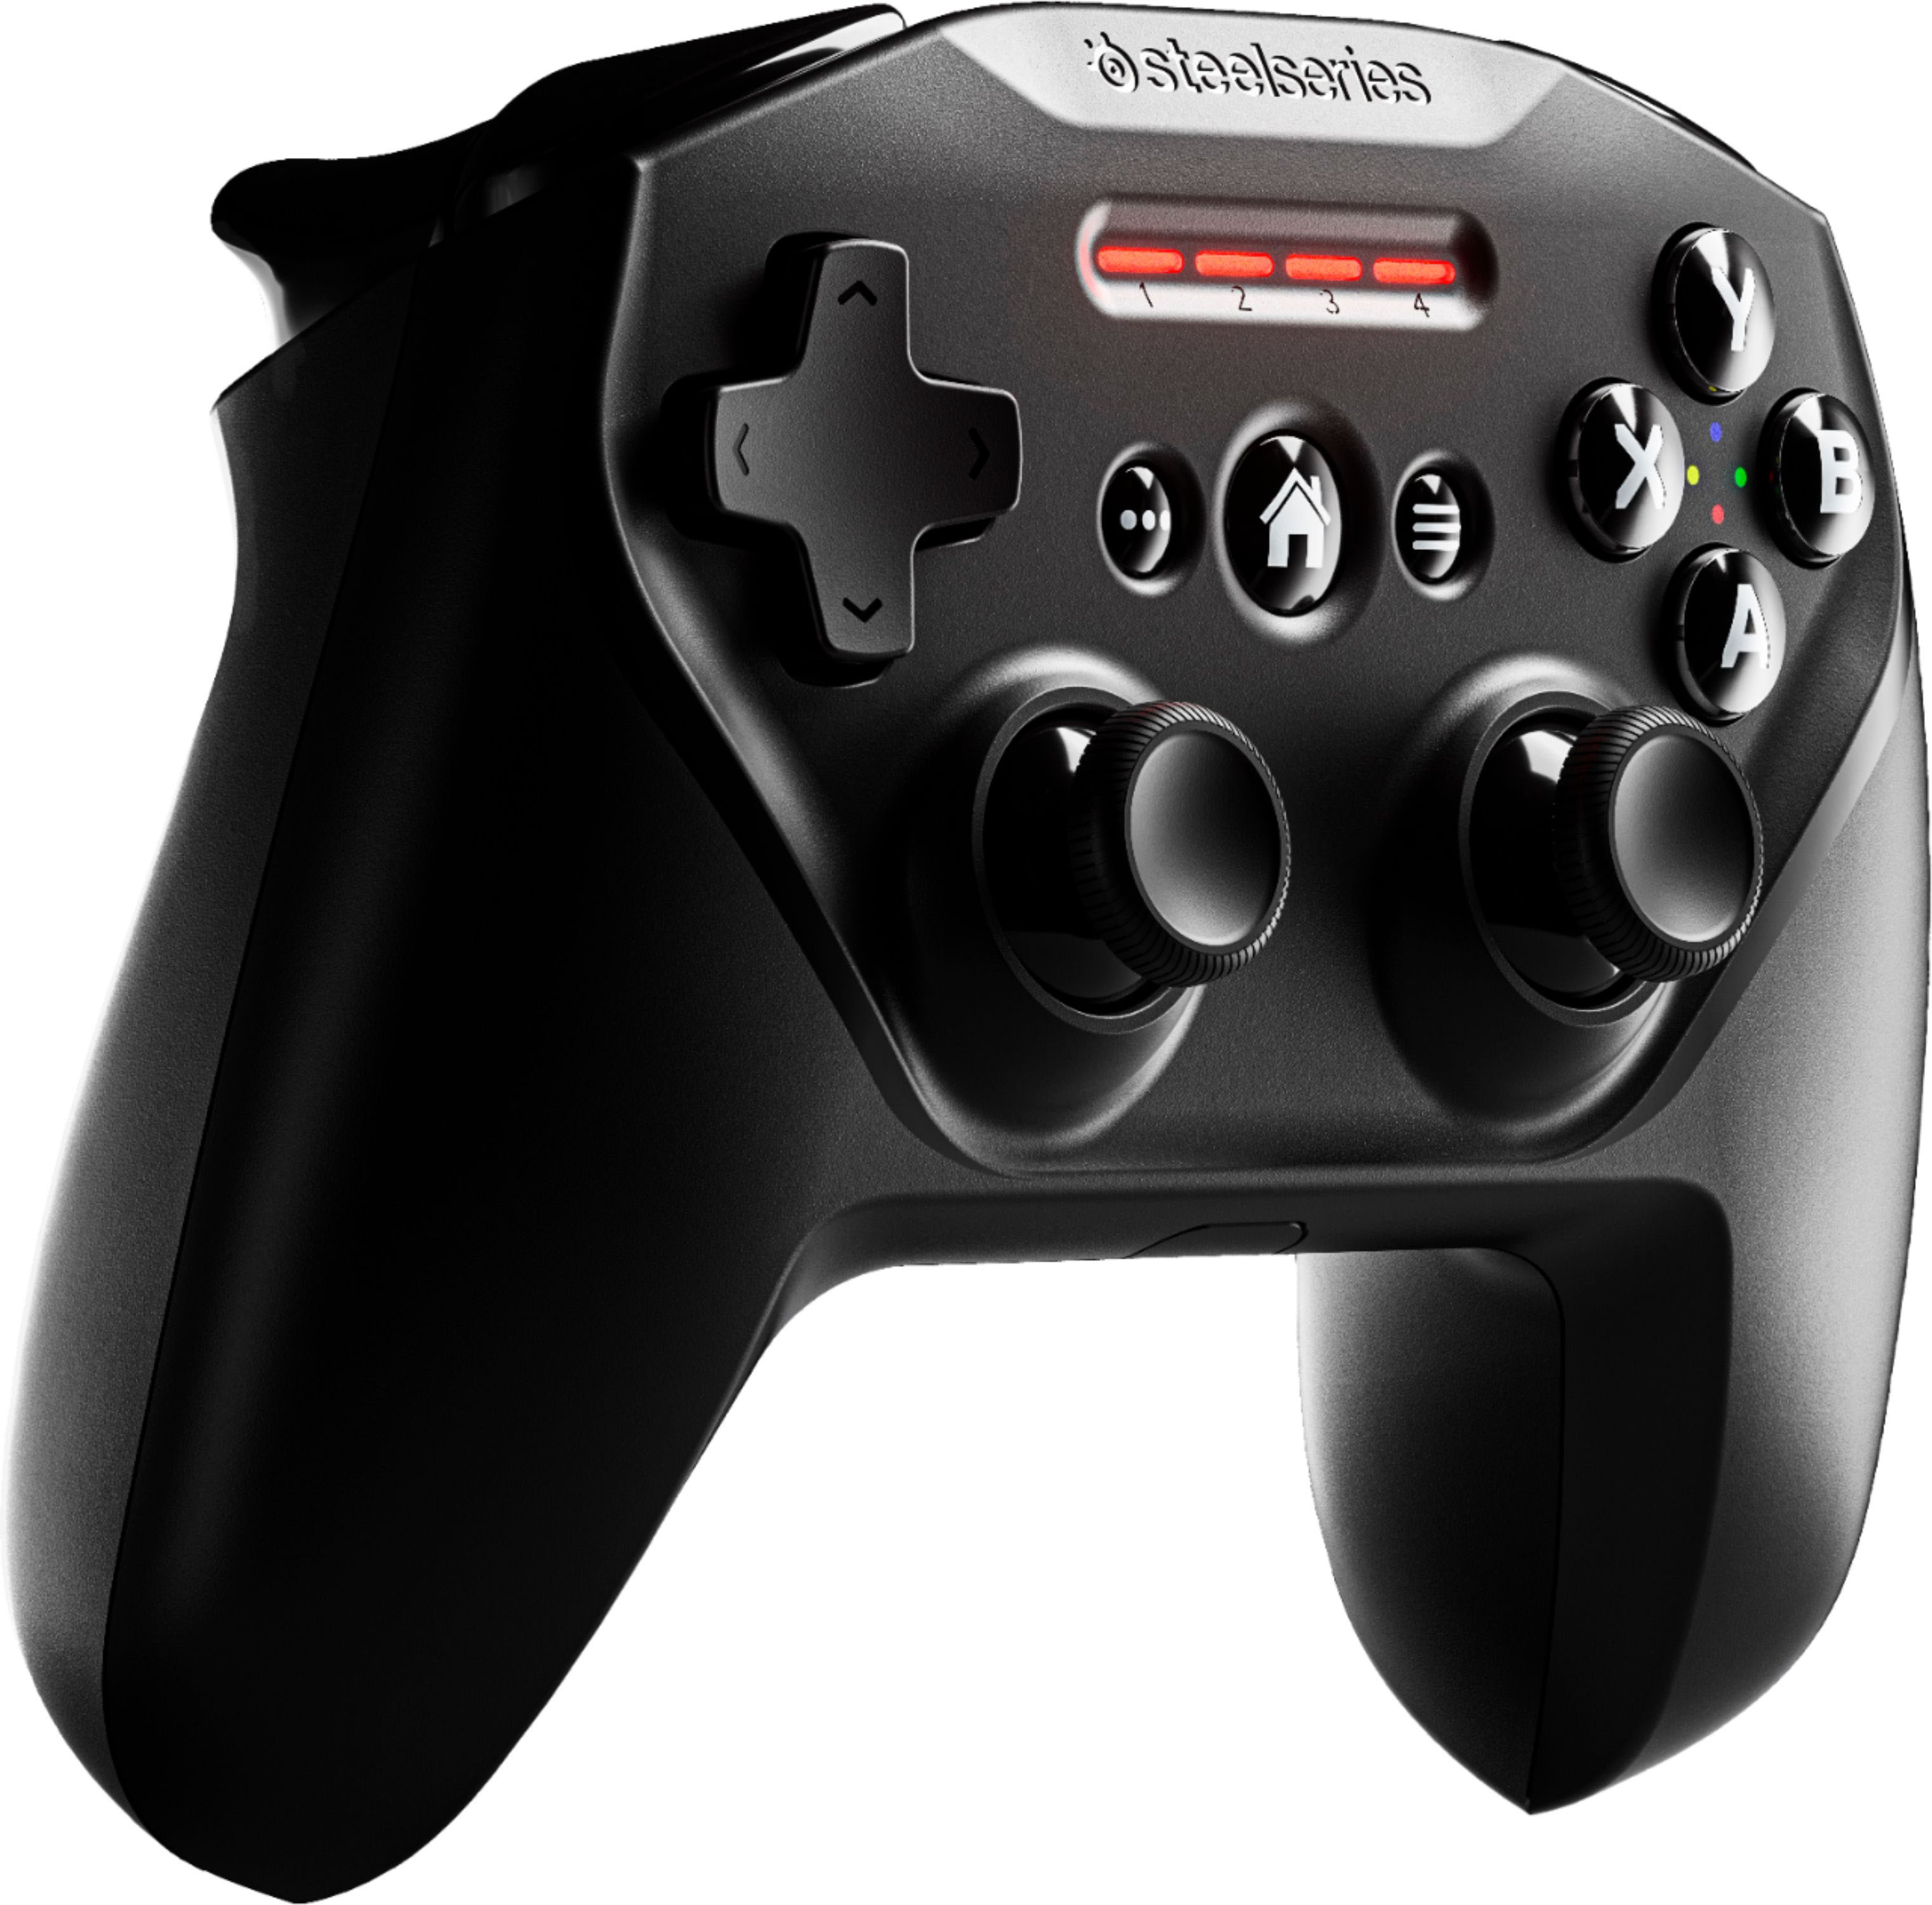 Angle View: SteelSeries NIMBUS+ Wireless Gaming Controller, Black, Black